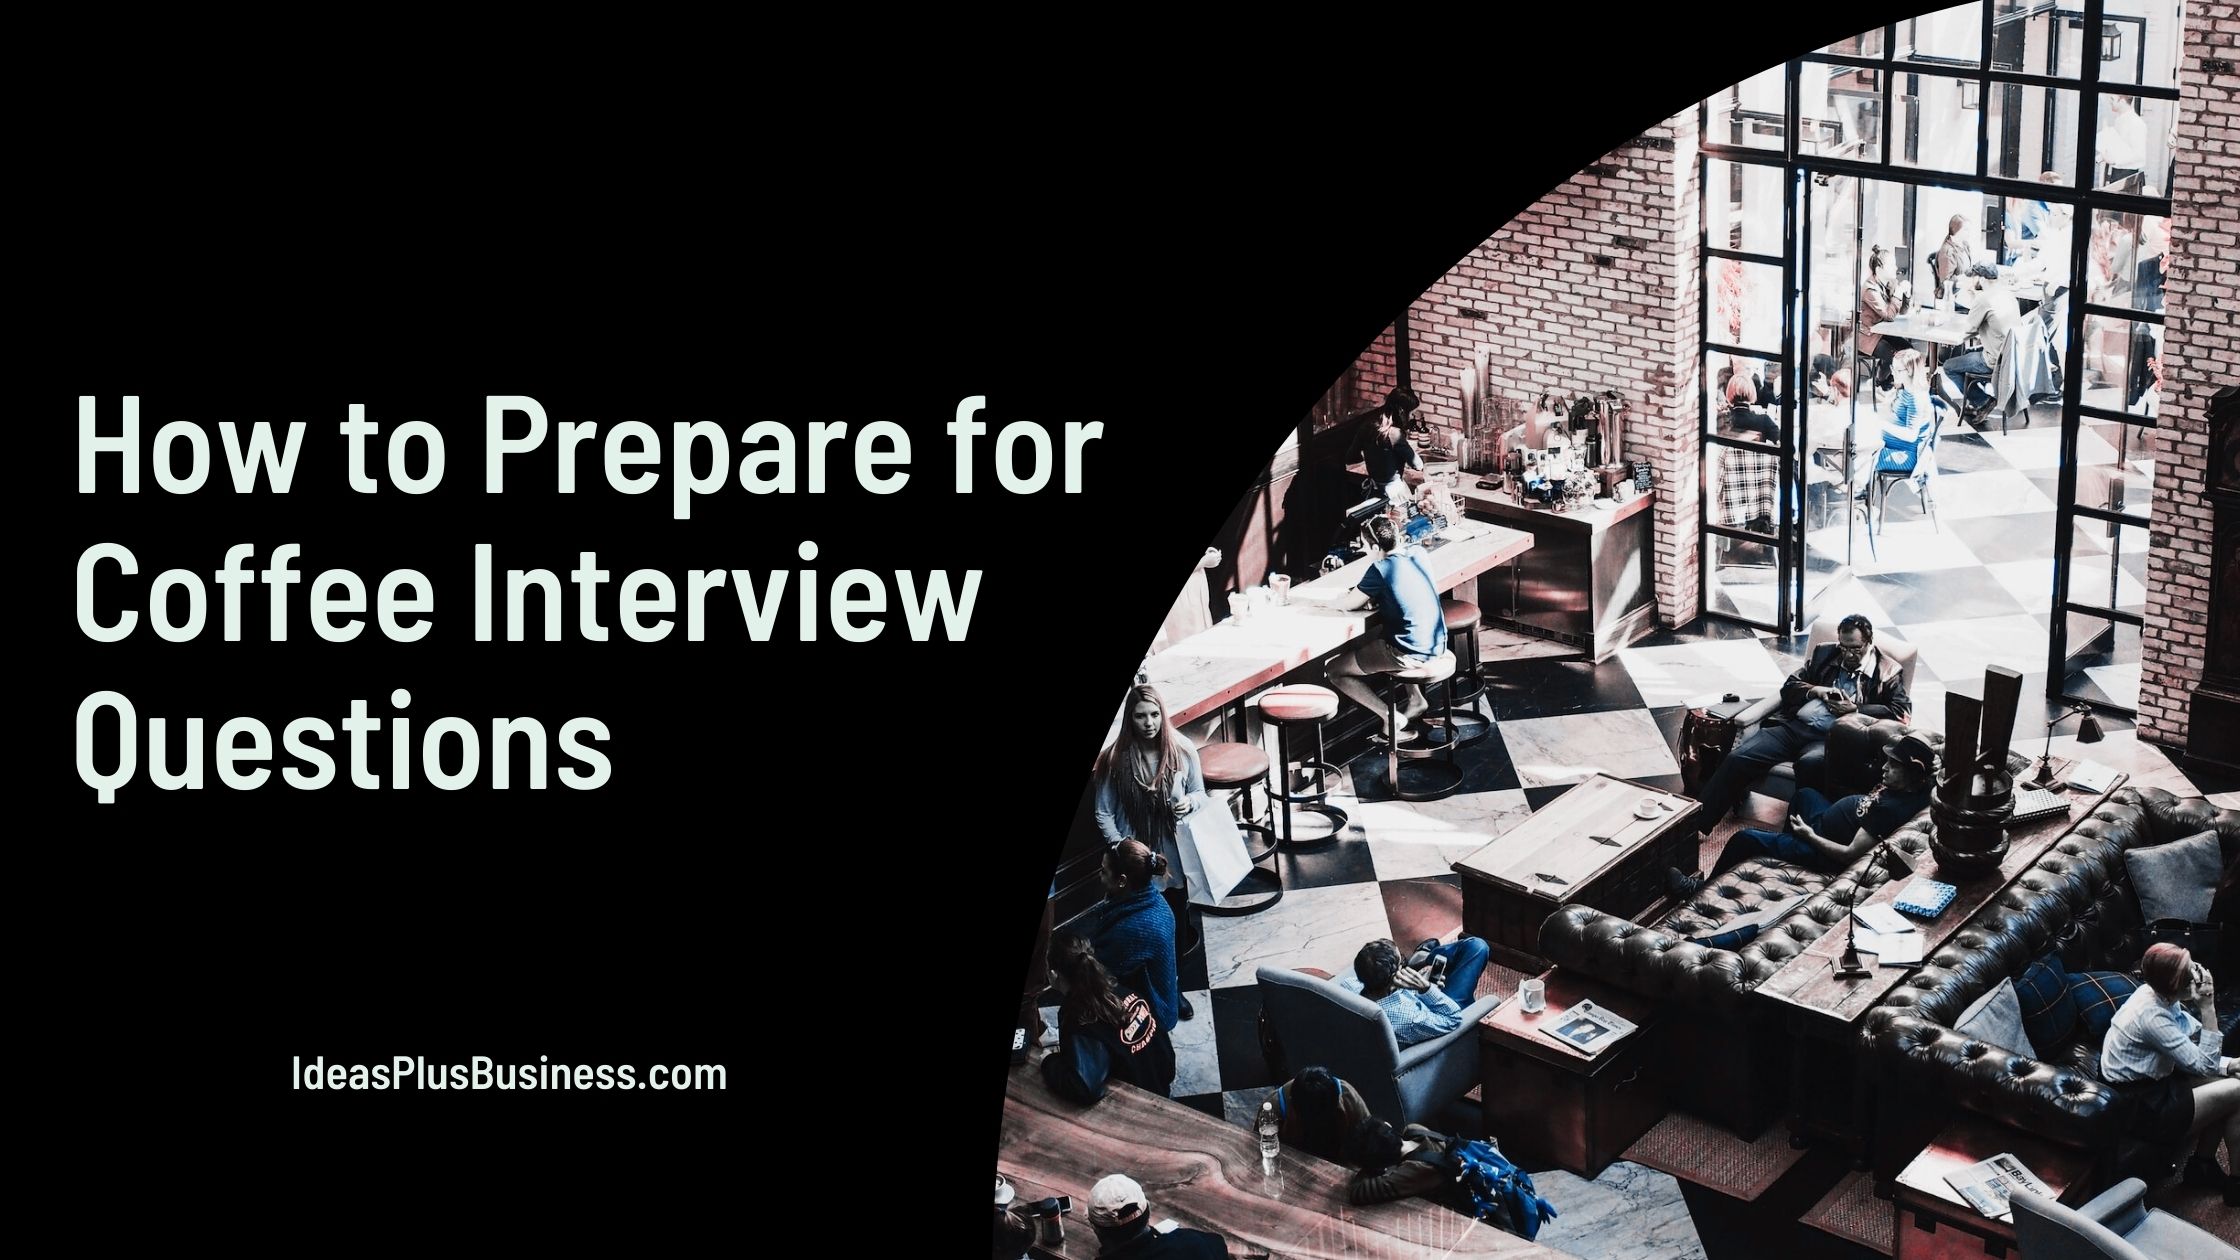 How to Prepare for Coffee Interview Questions